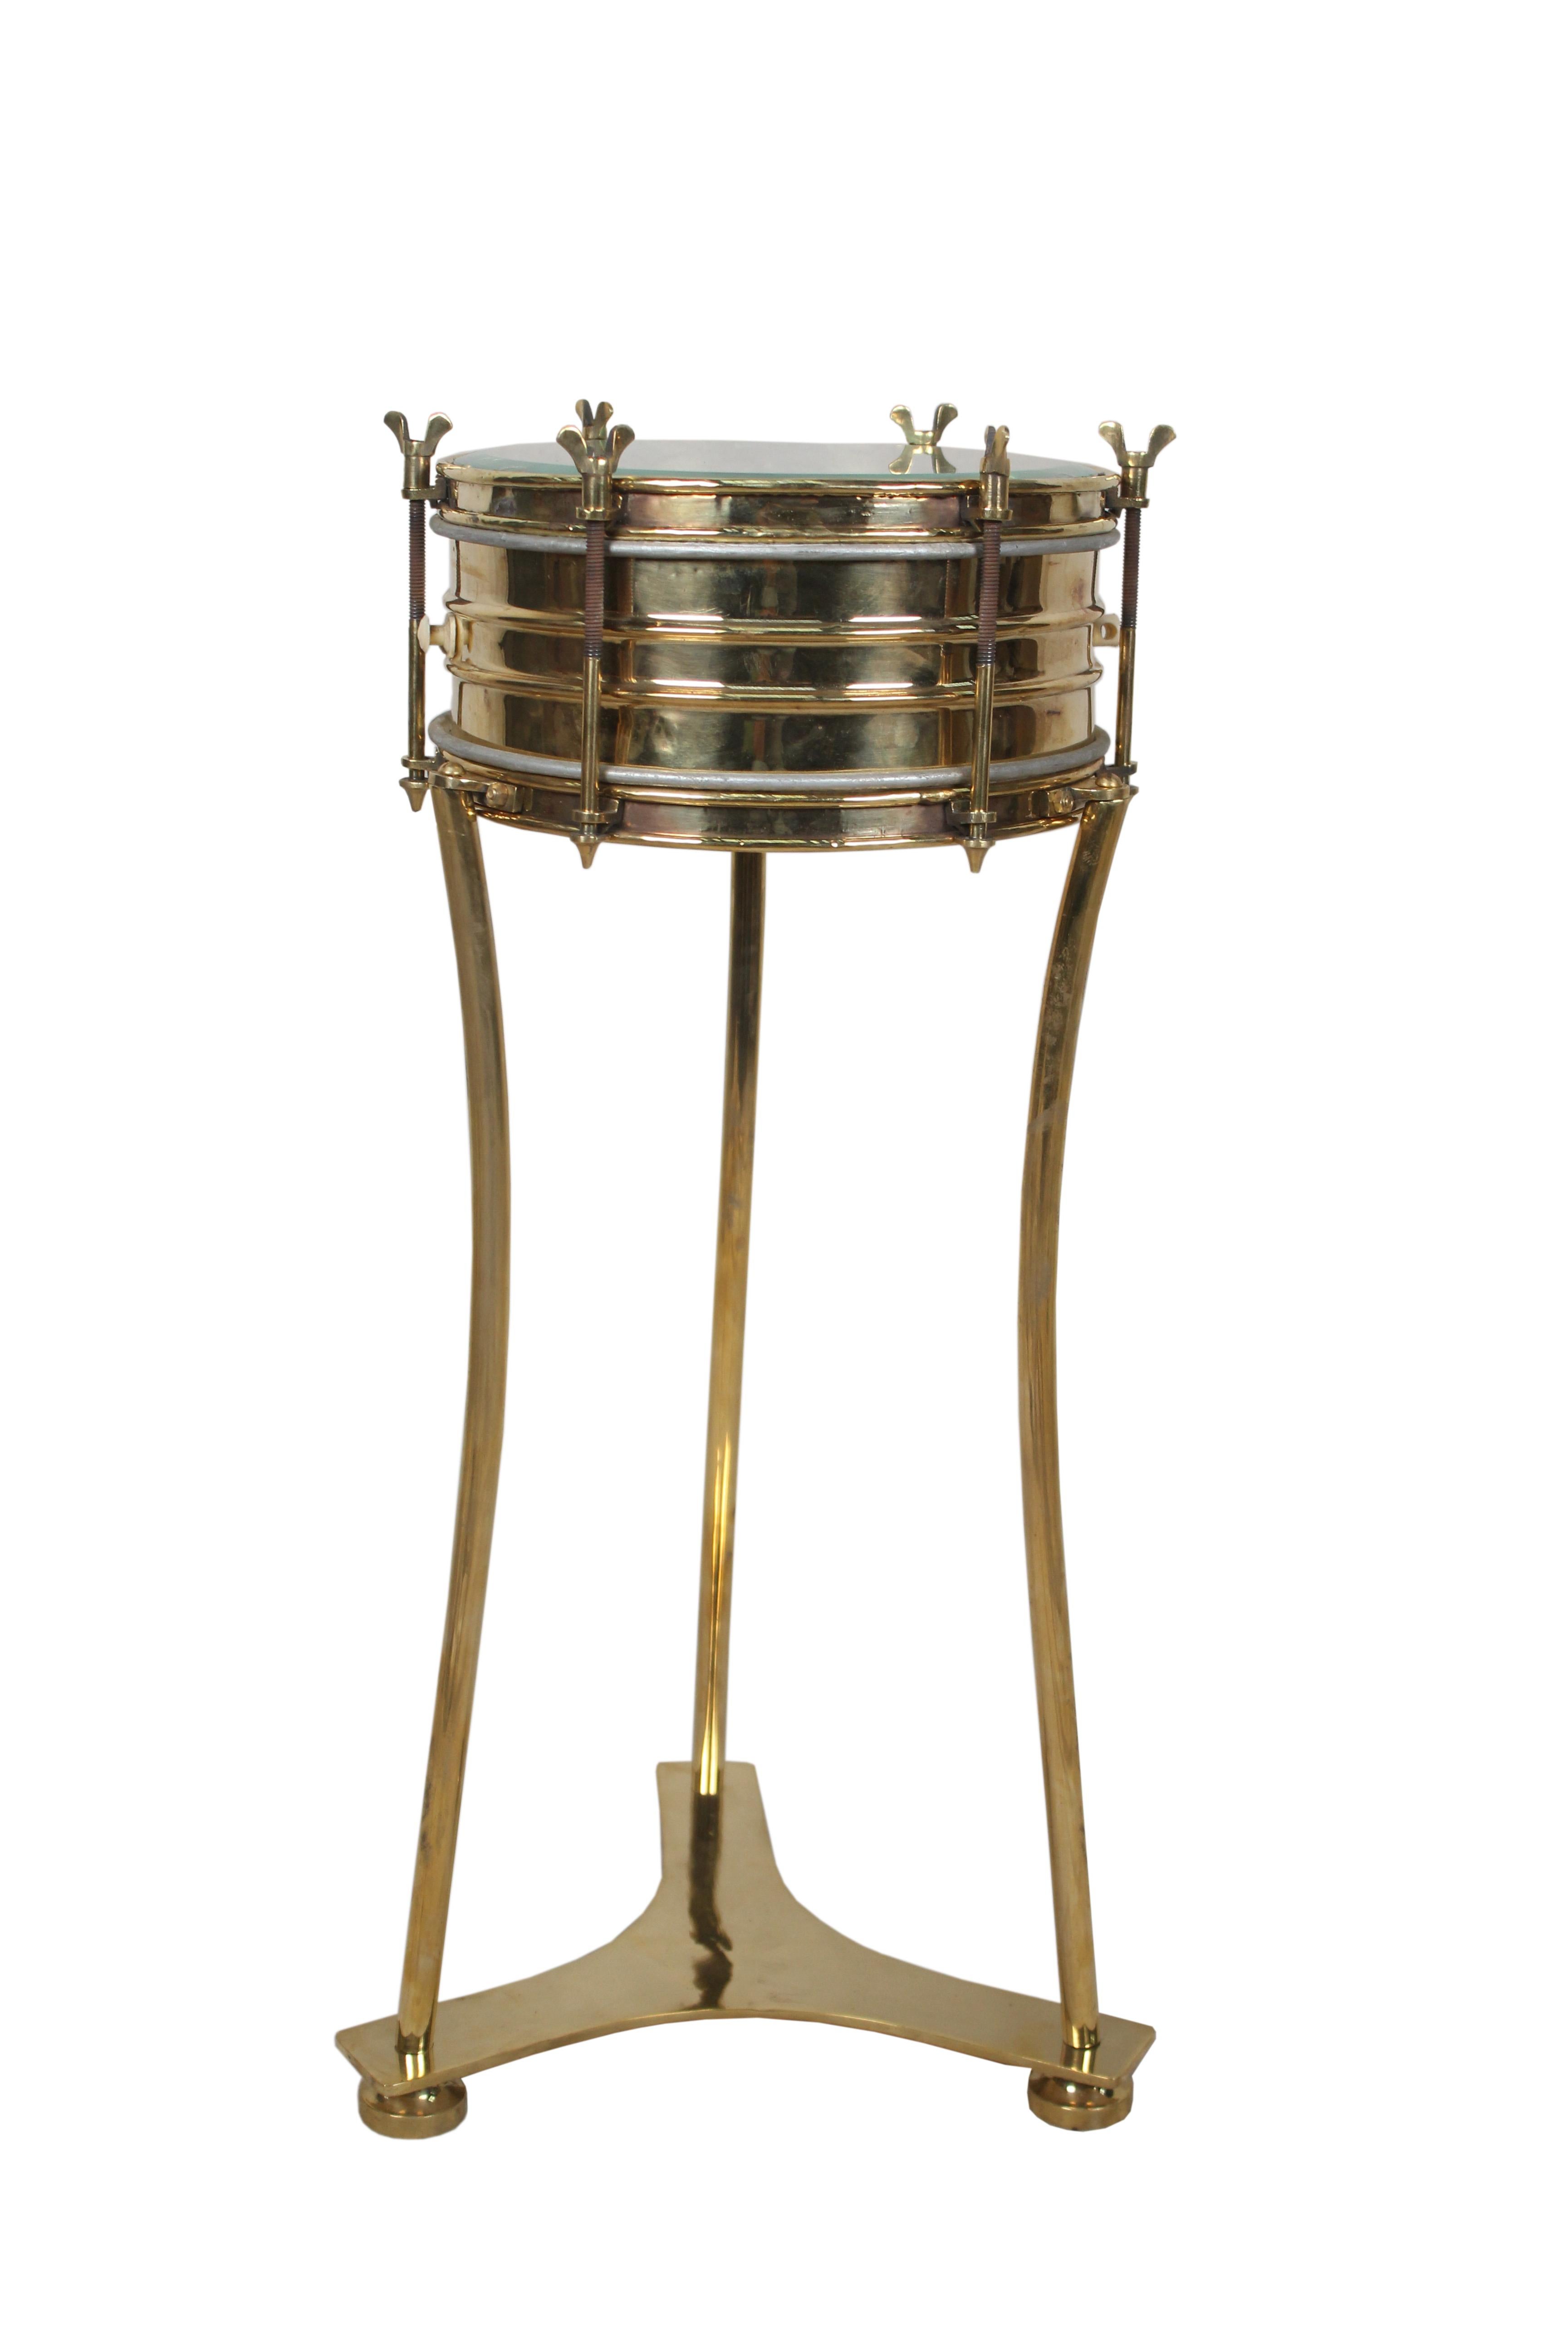 Brass military or marching band snare drum complete with drum heads in working order (possibly replaced in the last few years), bordered with the brass tension keys. I had this made into a side or end table by adding brass legs and base that can be